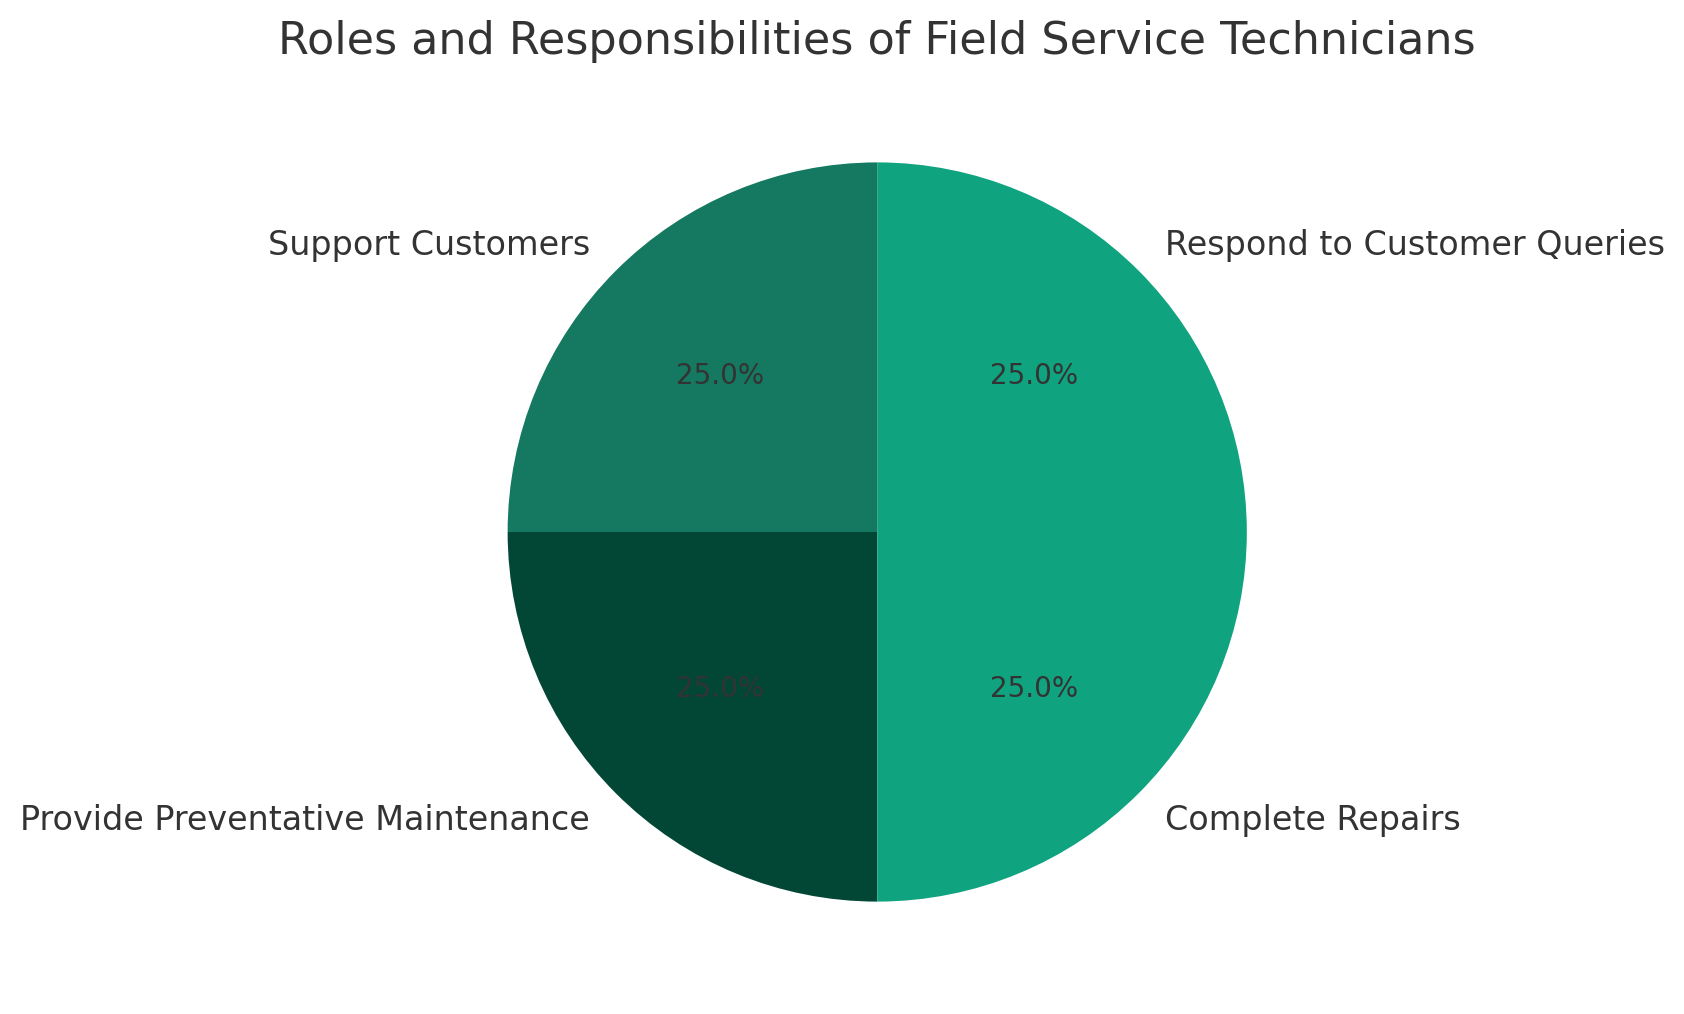 Roles and responsibilites of field service technician